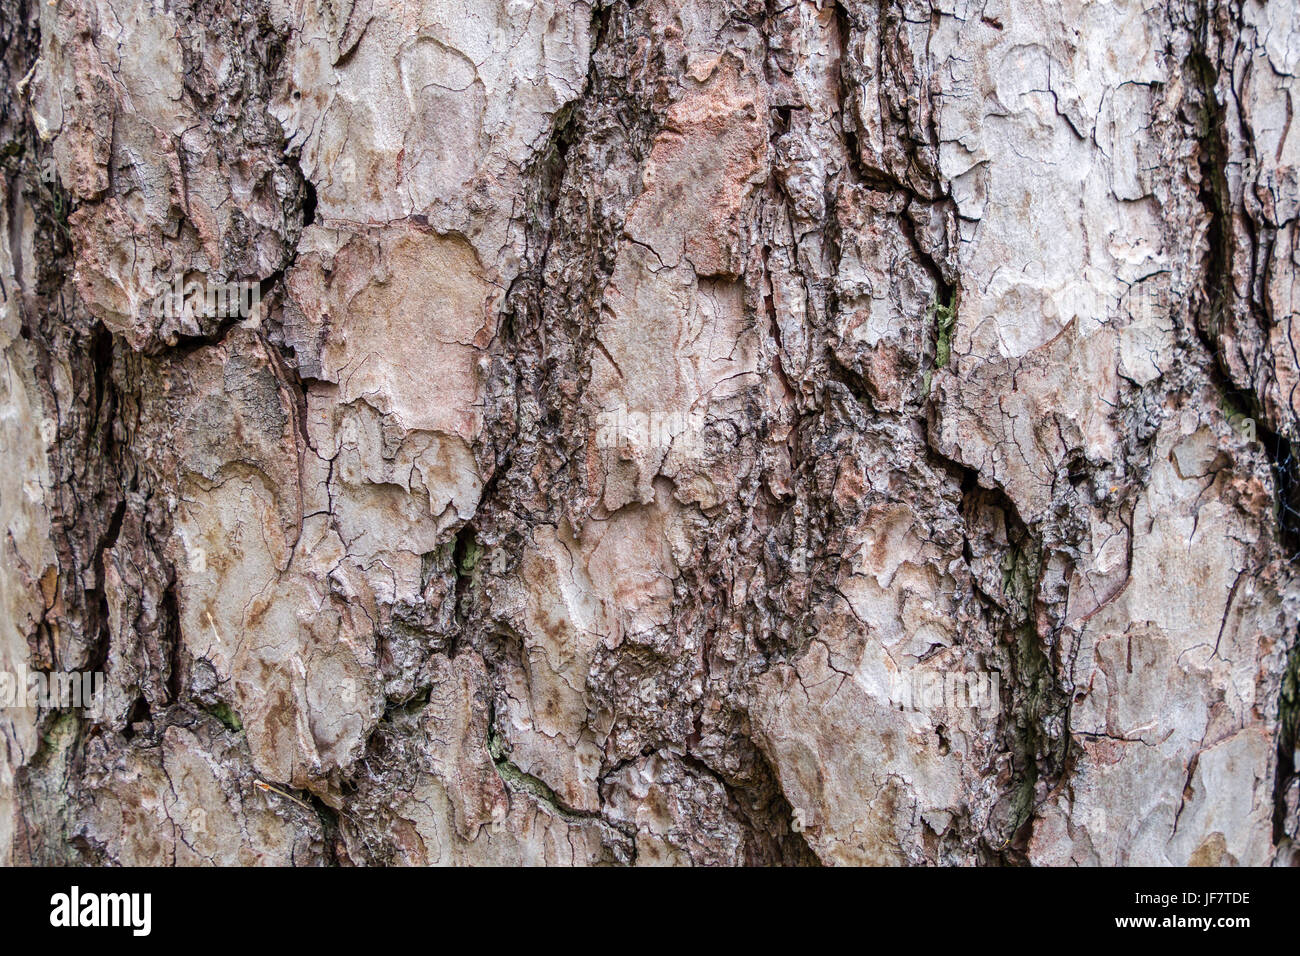 Texture of tree bark, background pattern in landscape format. Stock Photo